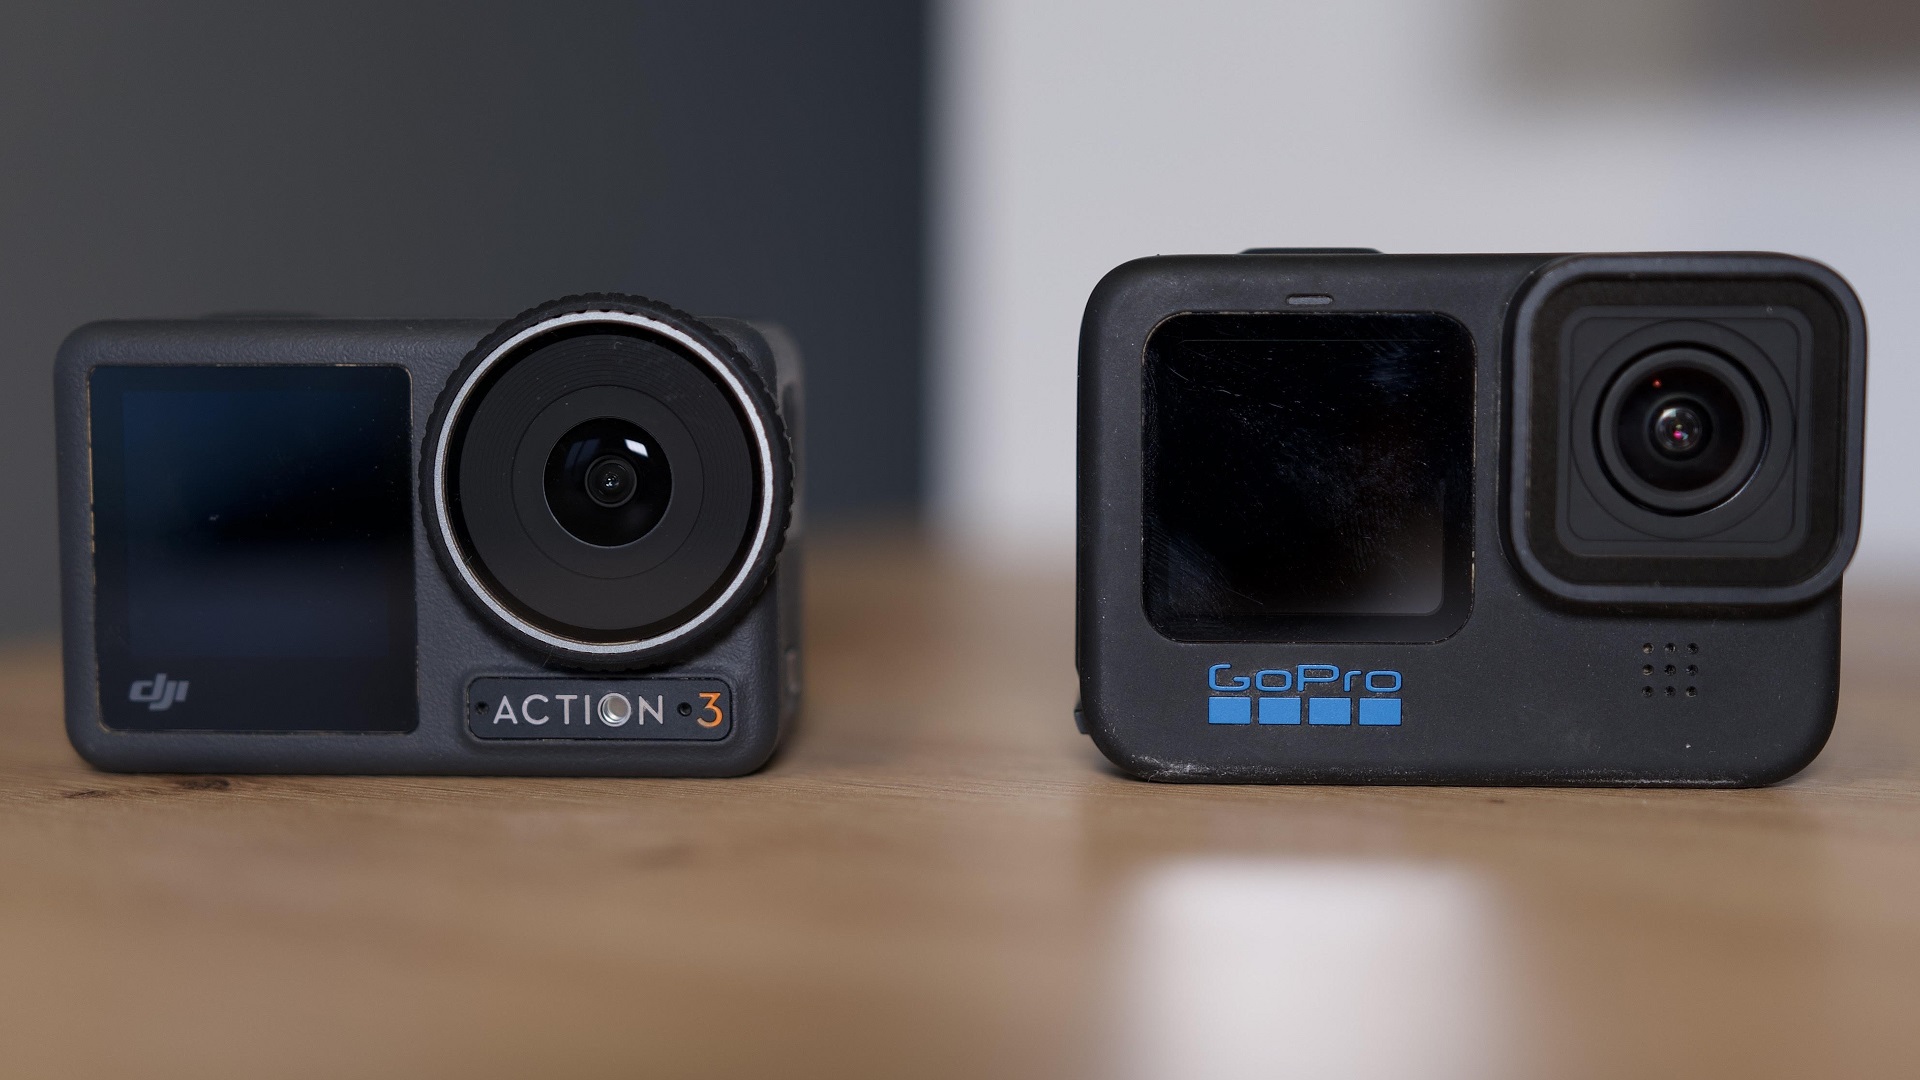 Best Fishing Action Camera? Better than GoPro? The DJI Action 3 